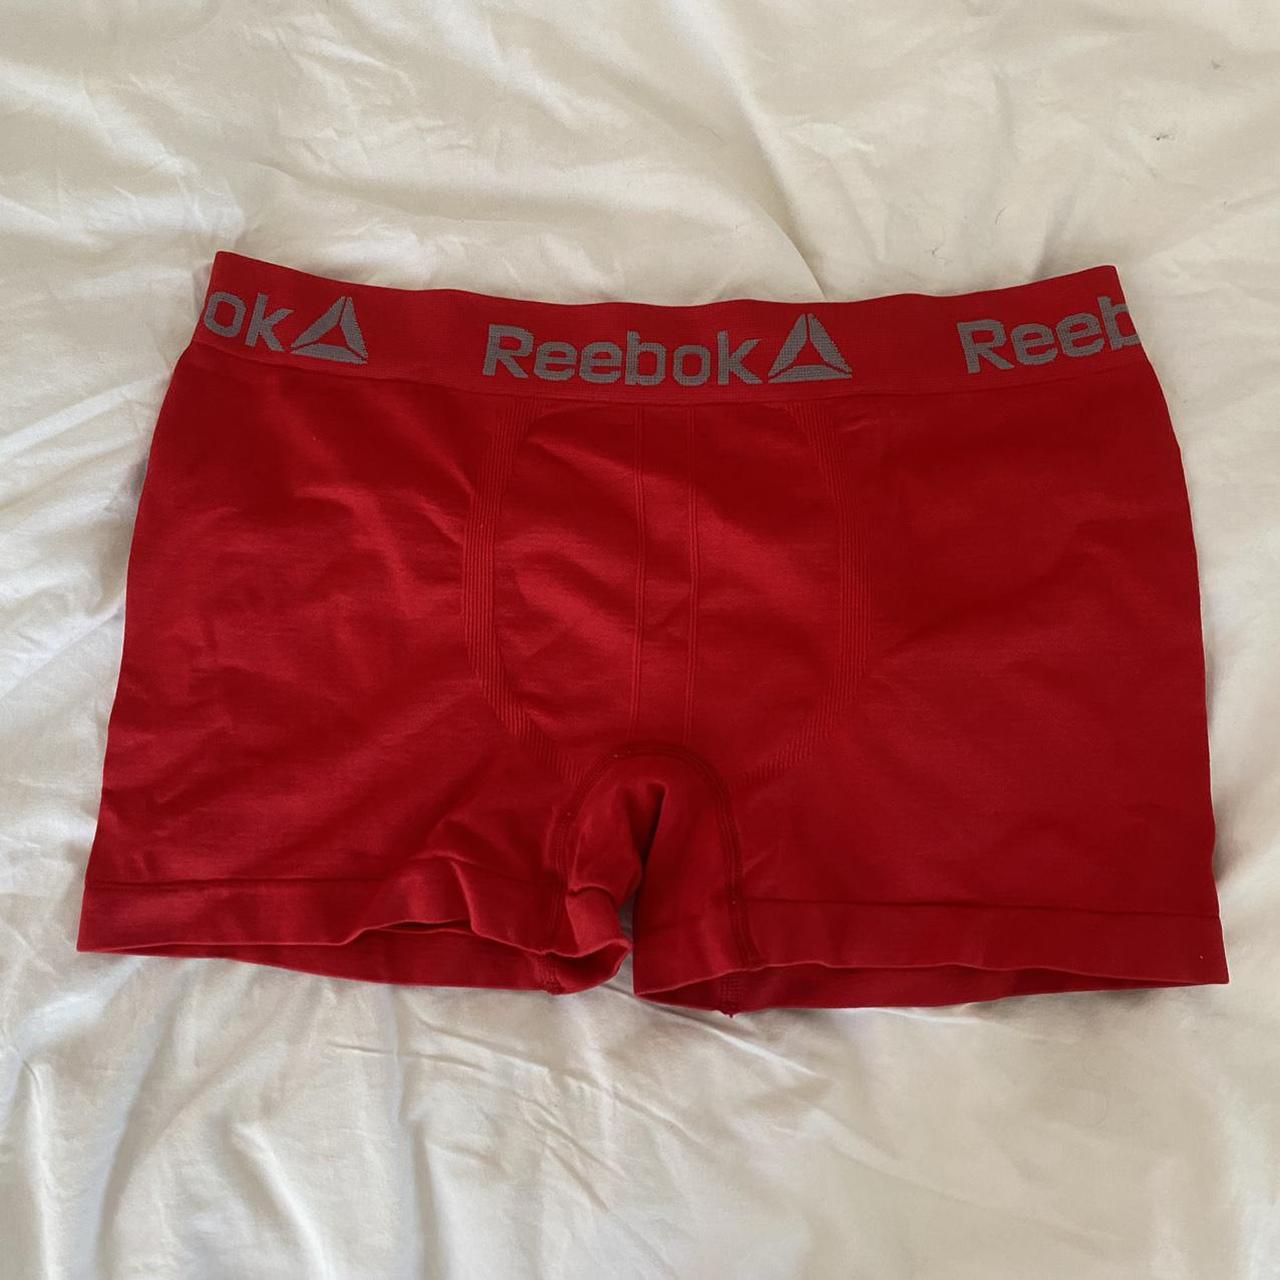 Product Image 1 - Red Reebok running trunk briefs.